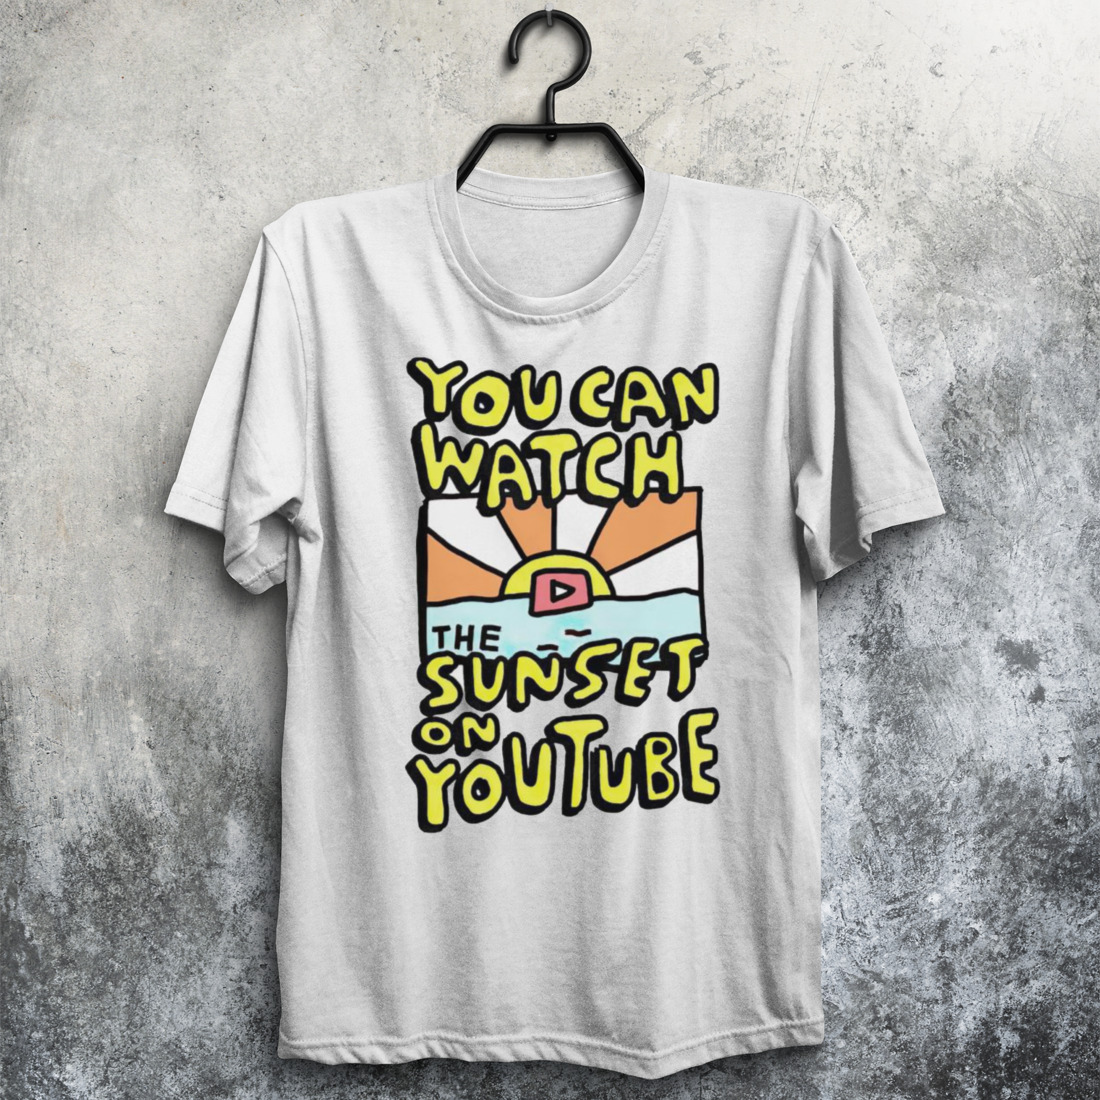 You can watch the sunset on youtube shirt